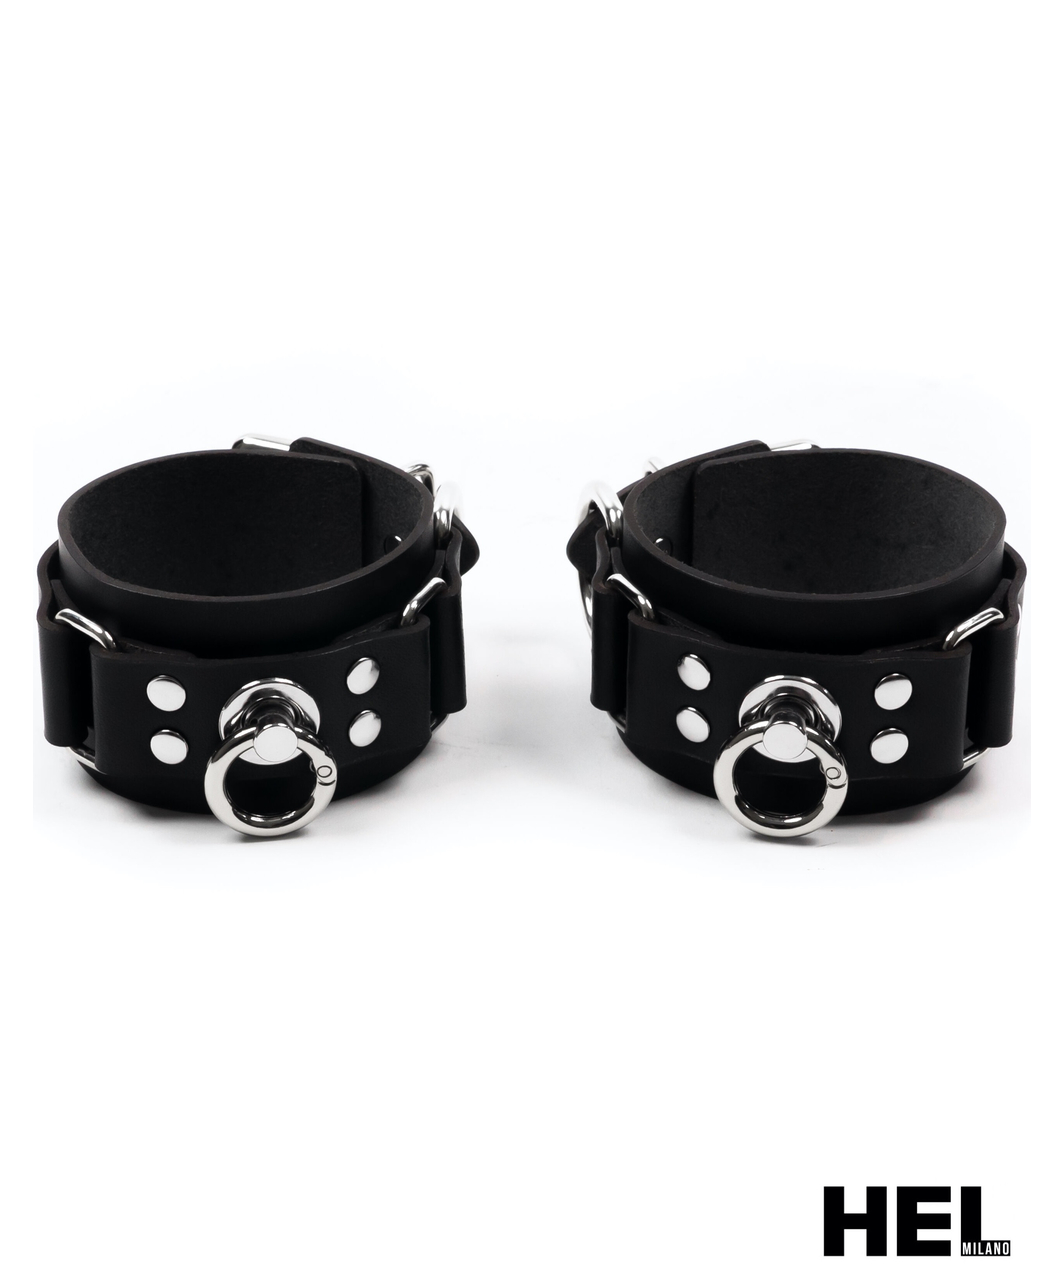 HEL Milano Leather Wrist/Ankle Cuffs in Black